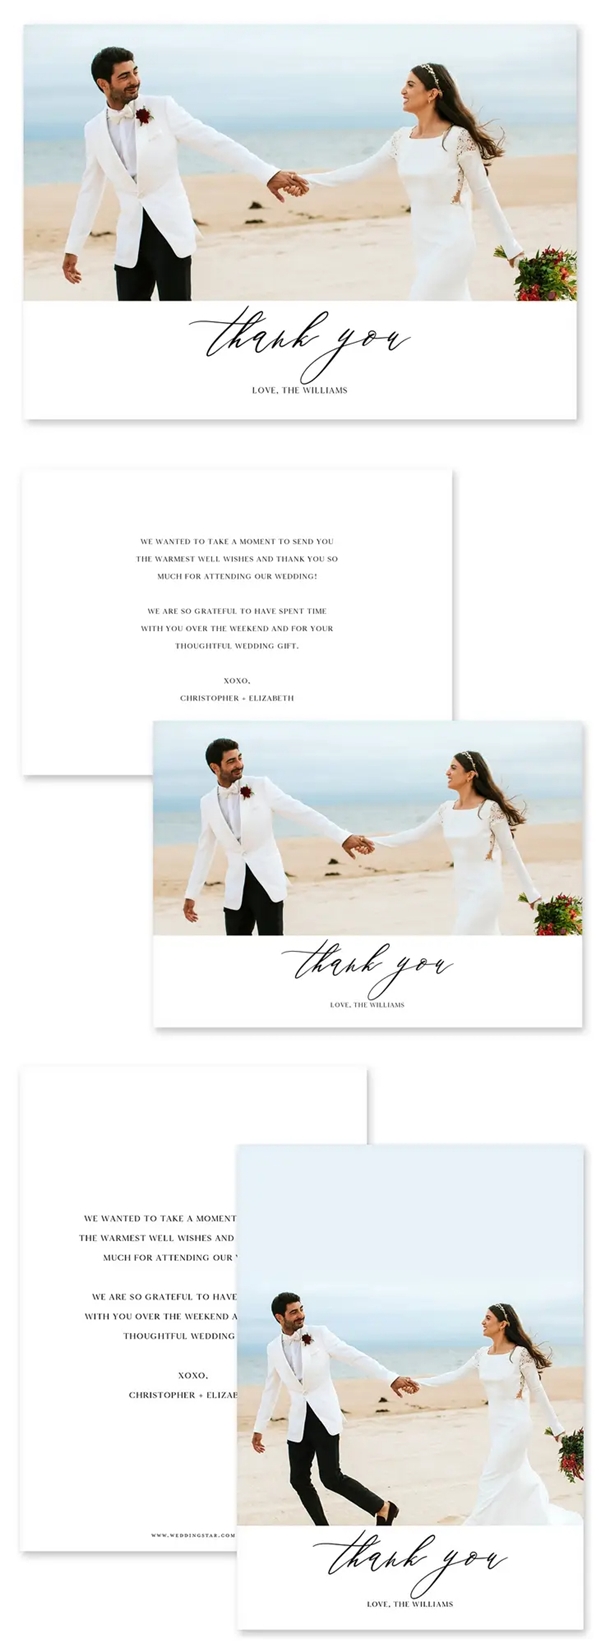 Custom Photo-Printed Thank You Cards - Scripted Beginnings